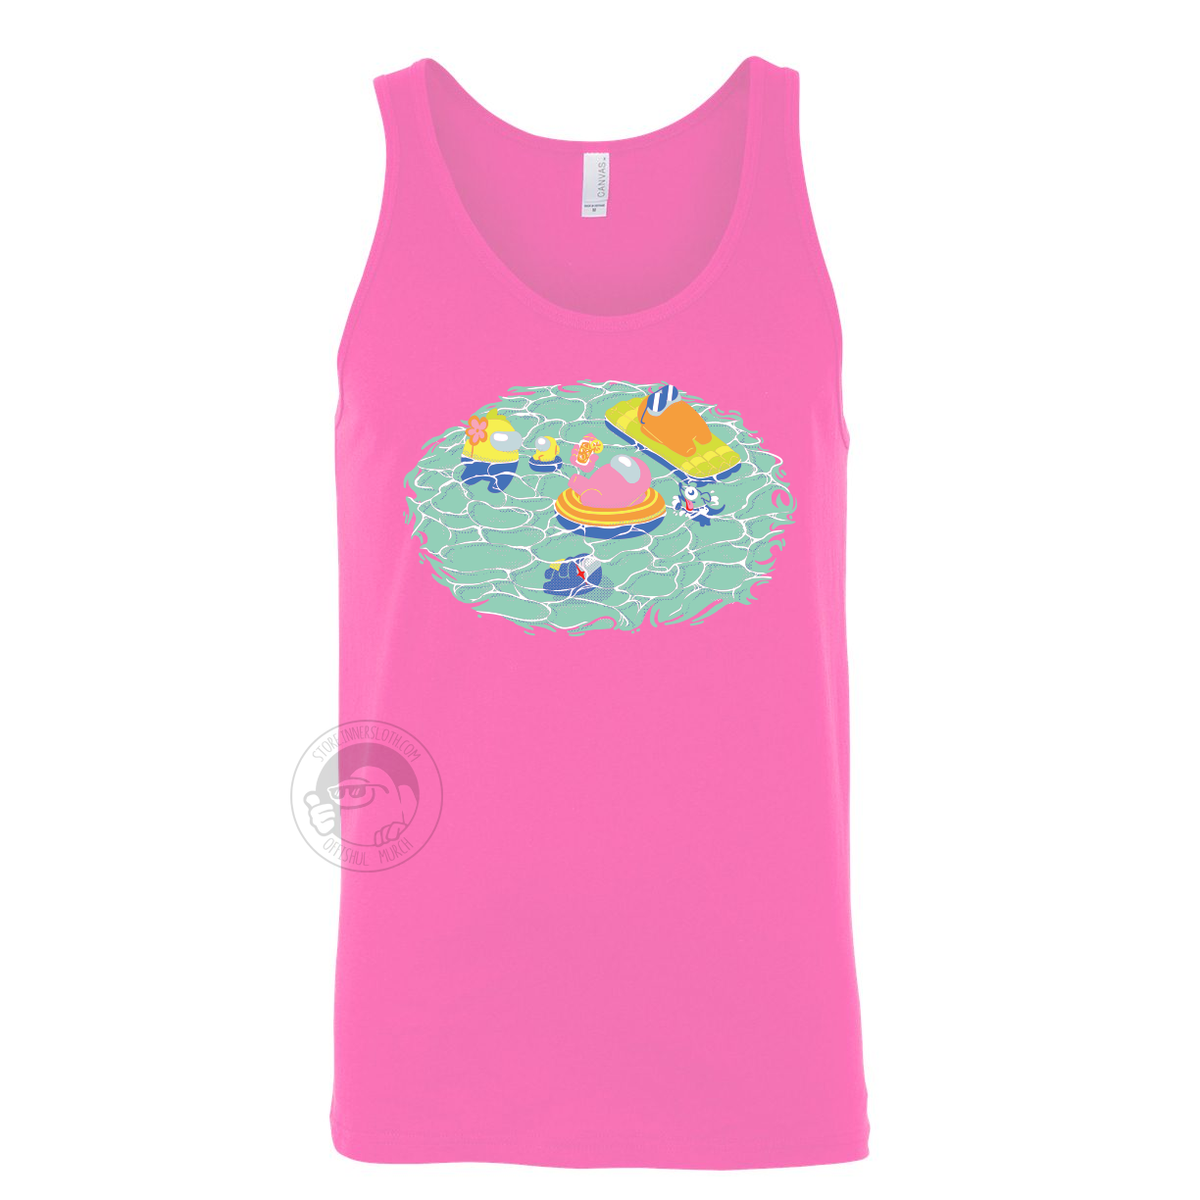 A product photo of the Among Us: Swimming Pool Tank Top. The tank top is pink and shows a pink crewmate lounging in an orange floatie on a teal, circular patch of water. A large yellow crewmate observes a yellow mini crewmate, in a tiny floatie. An orange crewmate, wearing sunglasses, sun bathes on a big lime pool floatie.You can also se a snorkeling space dog and an impostor at the bottom of the pool.